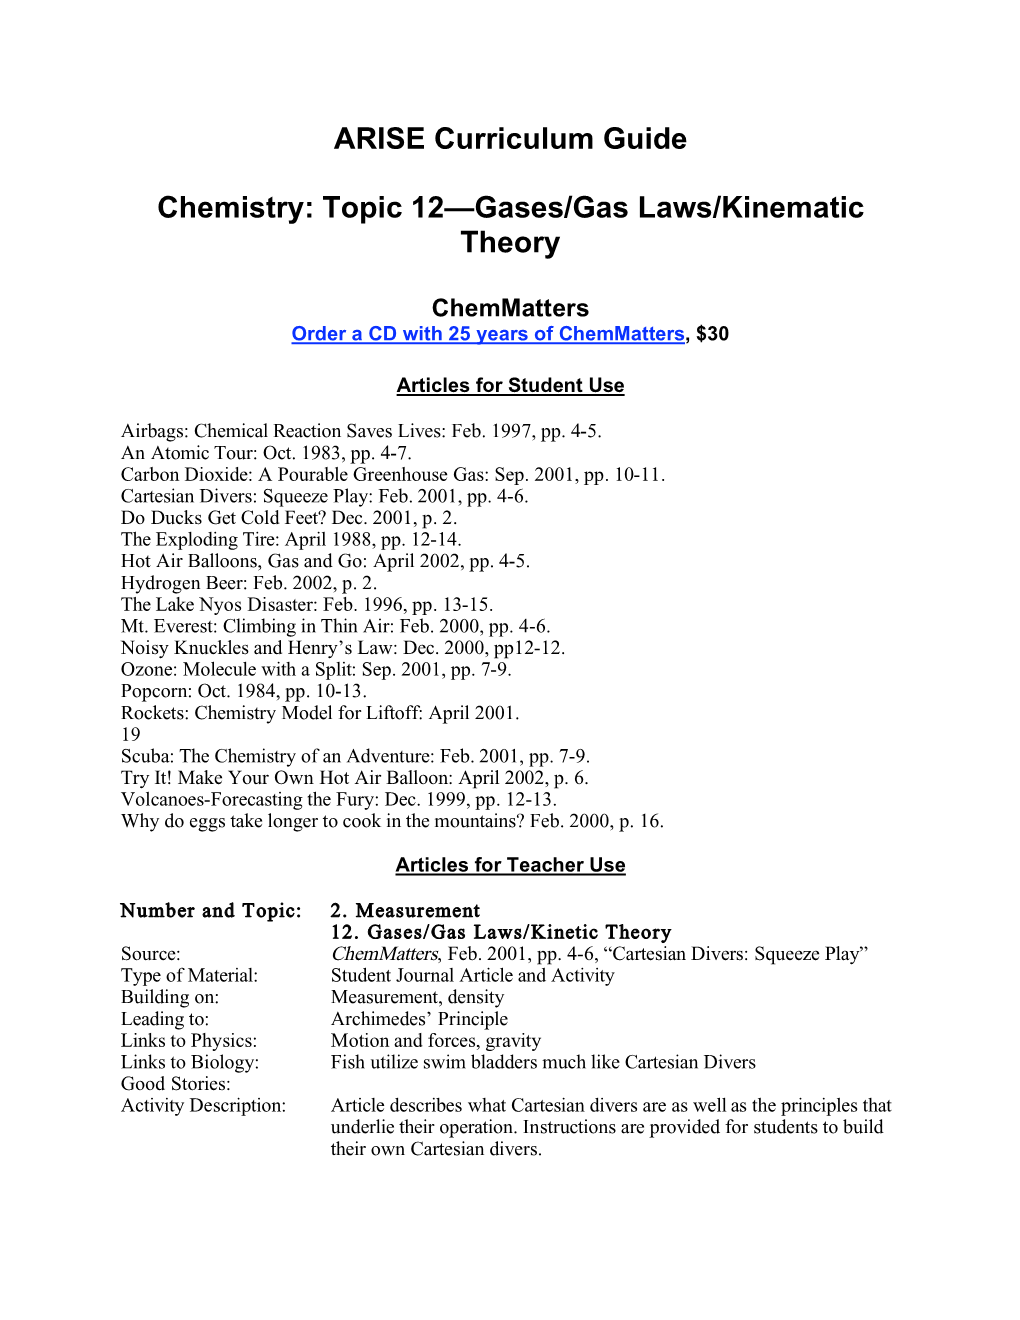 Gases, Gas Laws, and Kinetic Theory